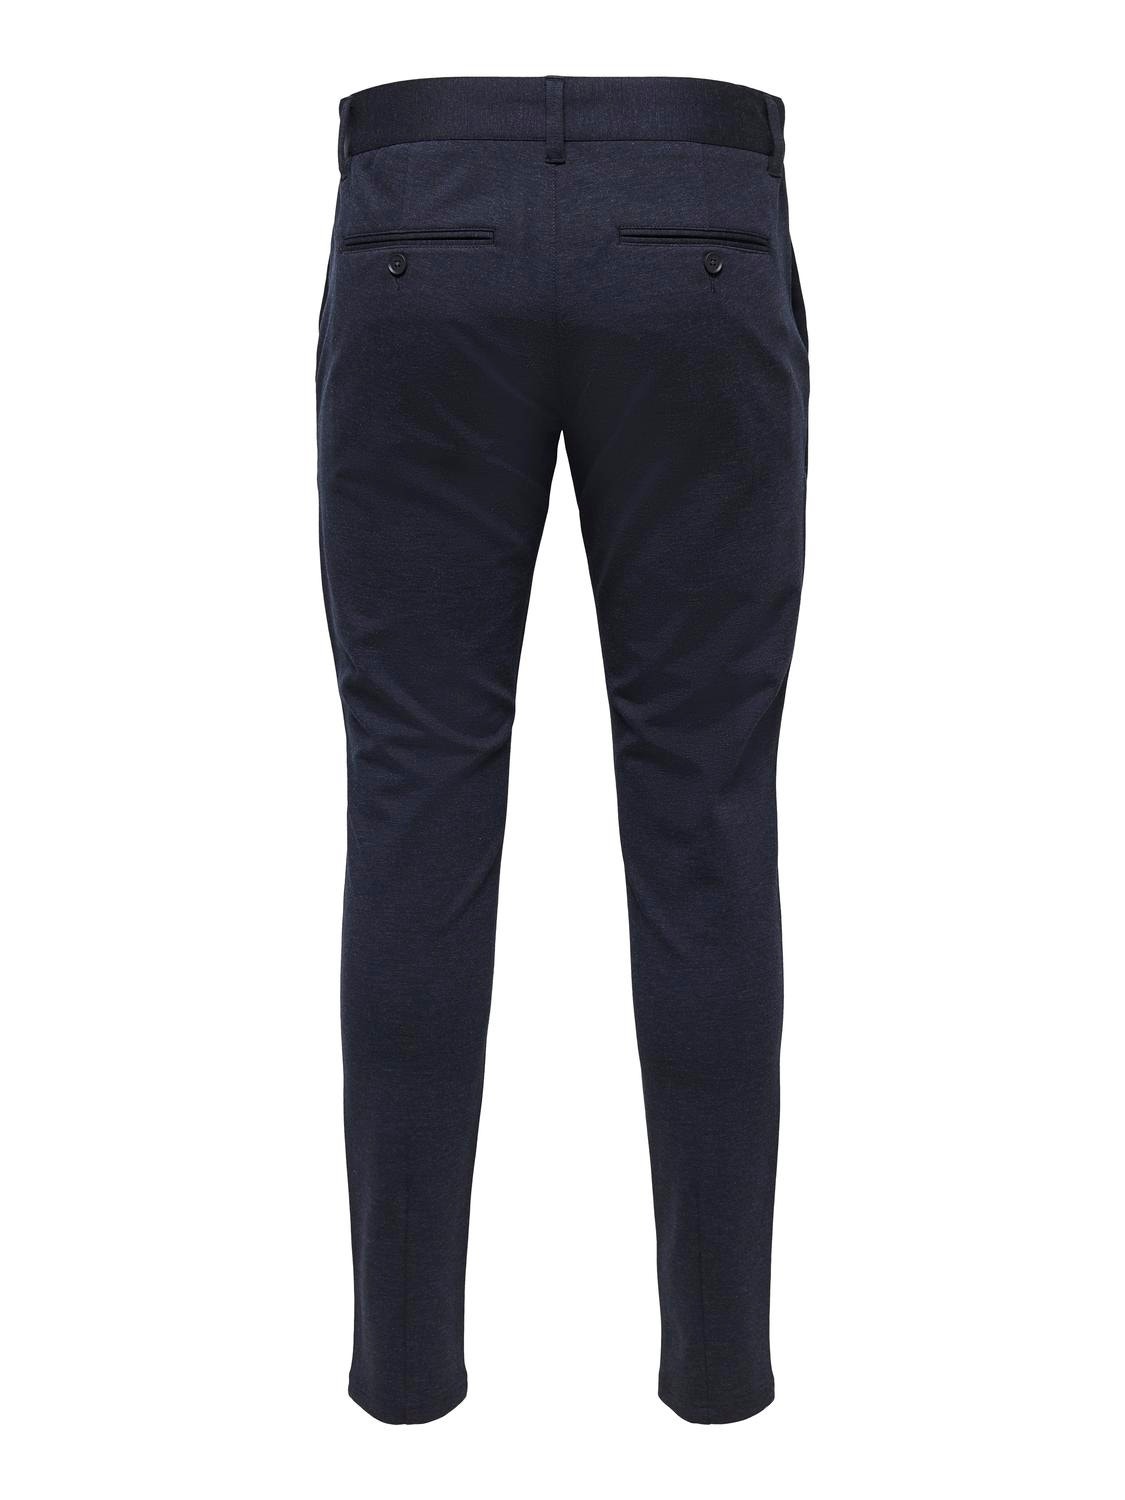 ONLY & SONS Slim Tapered Fit Mid waist Trousers -Dress Blues - 22026326